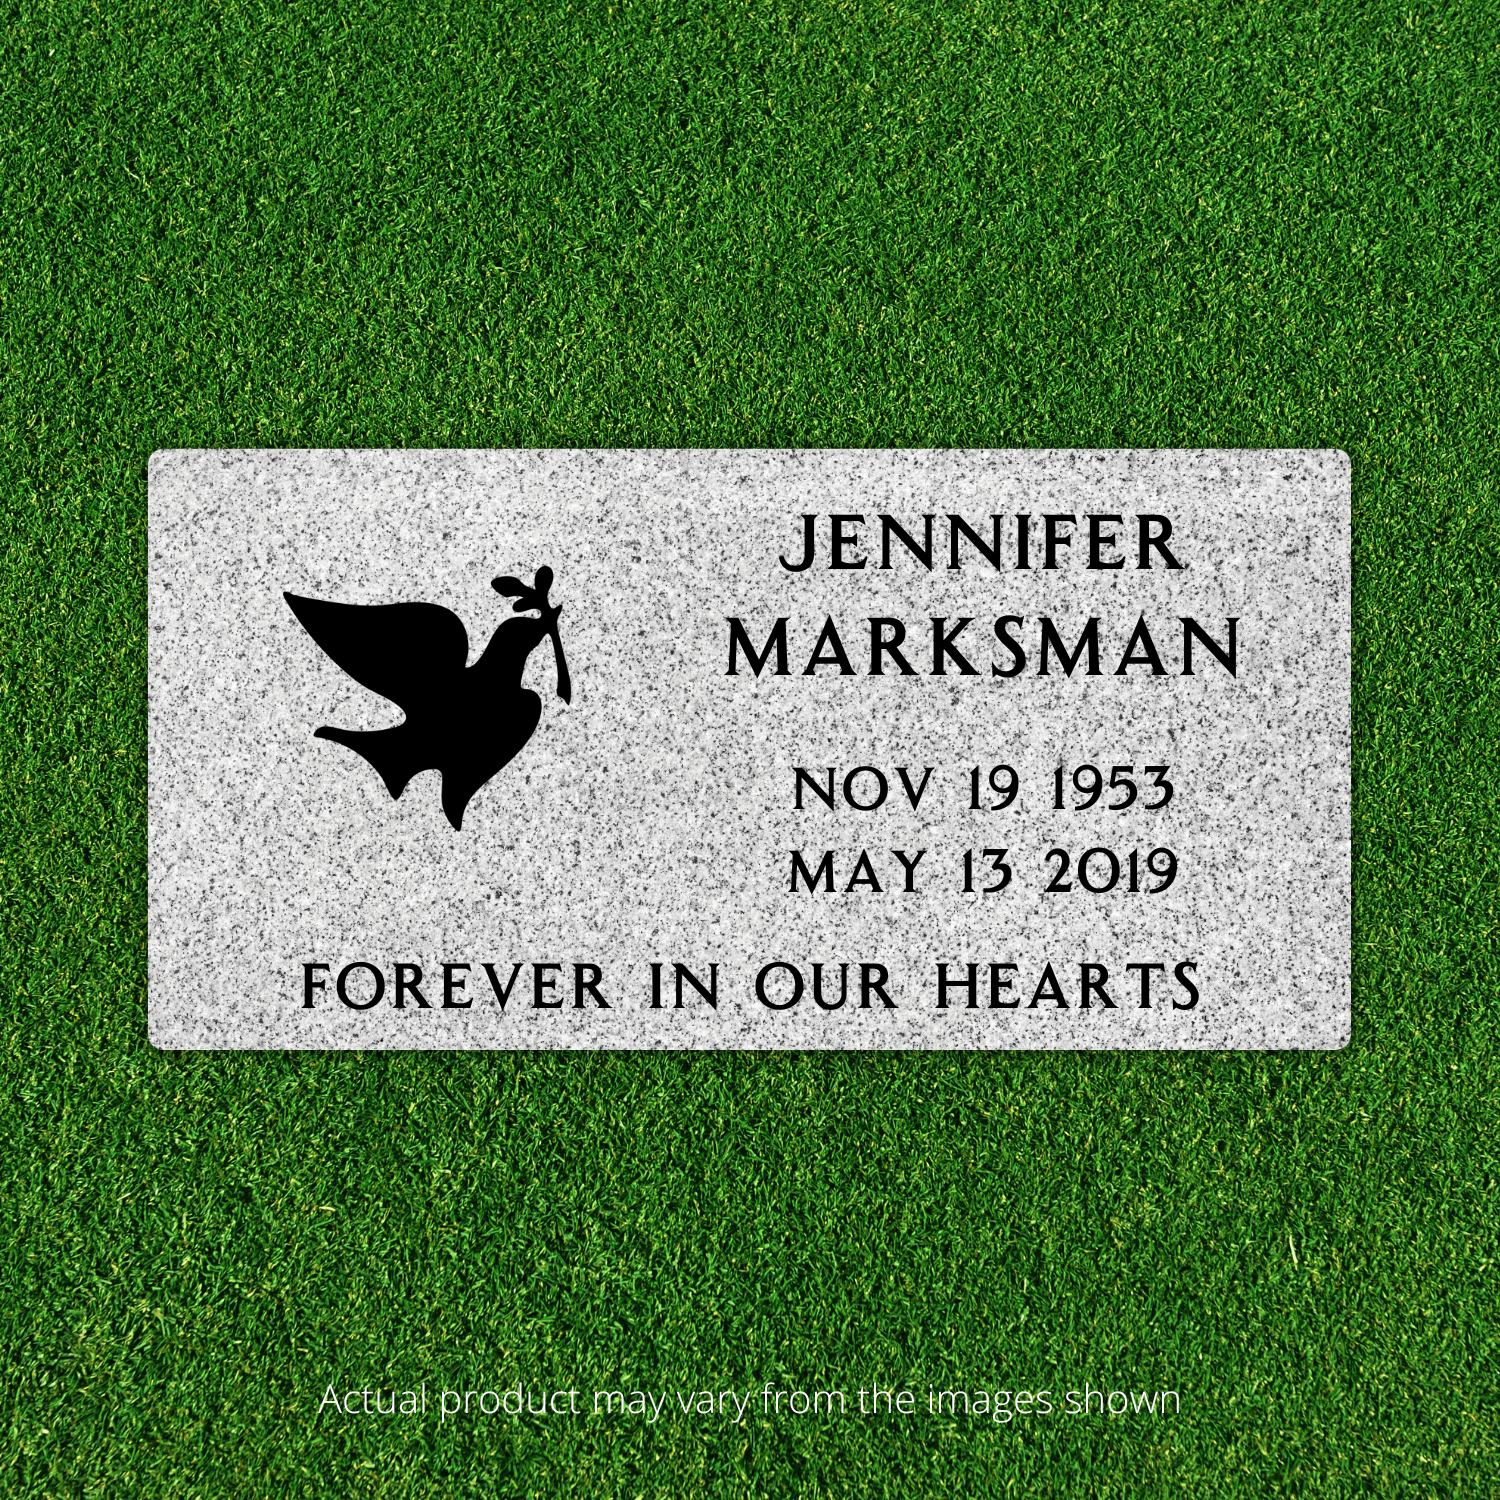 Flat Headstone Marker with One Symbol - (20in x 10in x 3in) - Markers & Headstones